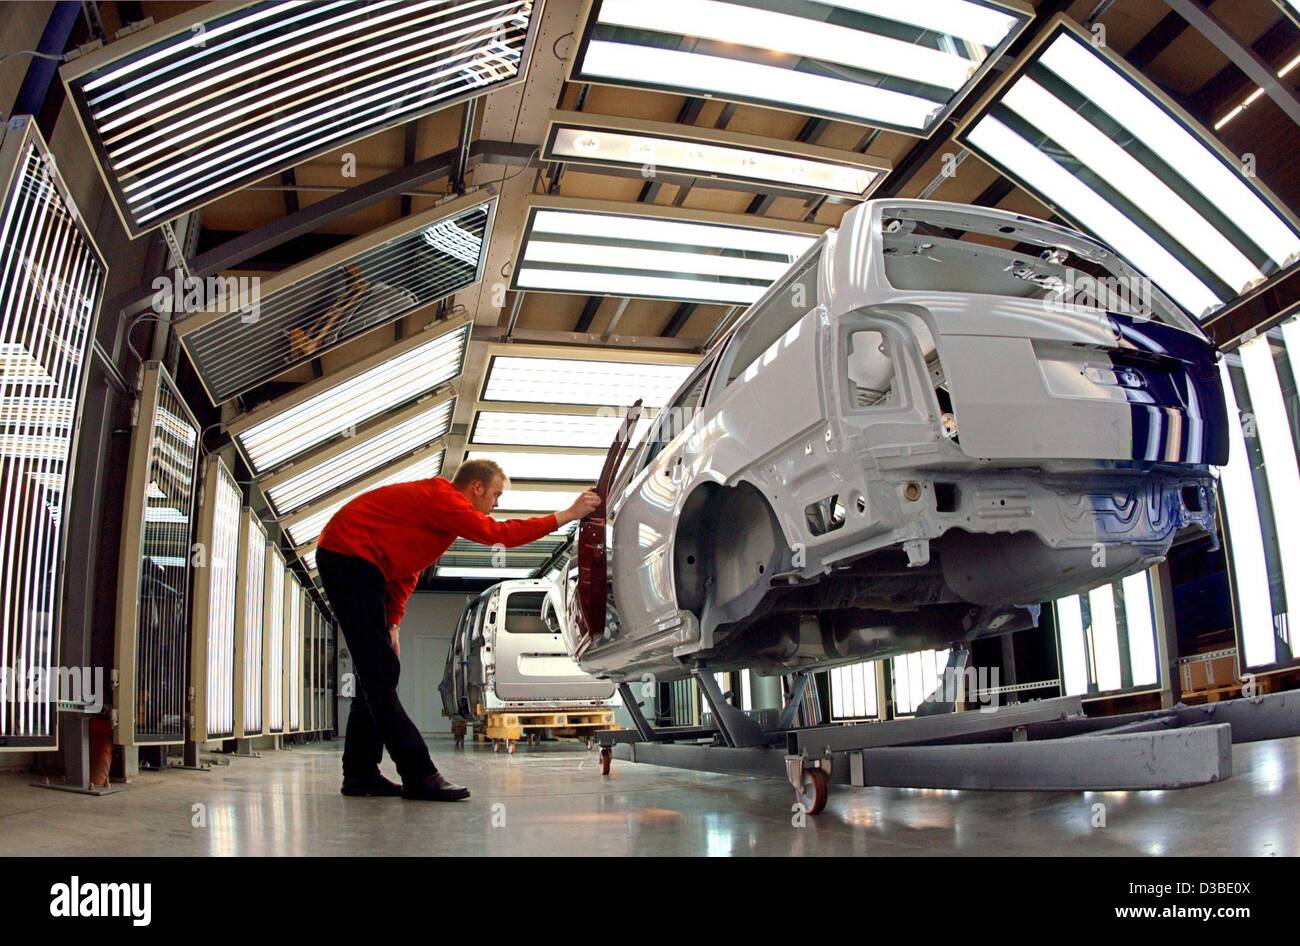 (dpa) - Holger Felgner checks car bodies in a tunnel of the new FlatScan system, developed to quickly see defects in car parts, at the company uwe braun in Lenzen, Germany, 16 January 2003. The company develops and produces the FlatScan systems to check defects in the paint and smallest damages in c Stock Photo